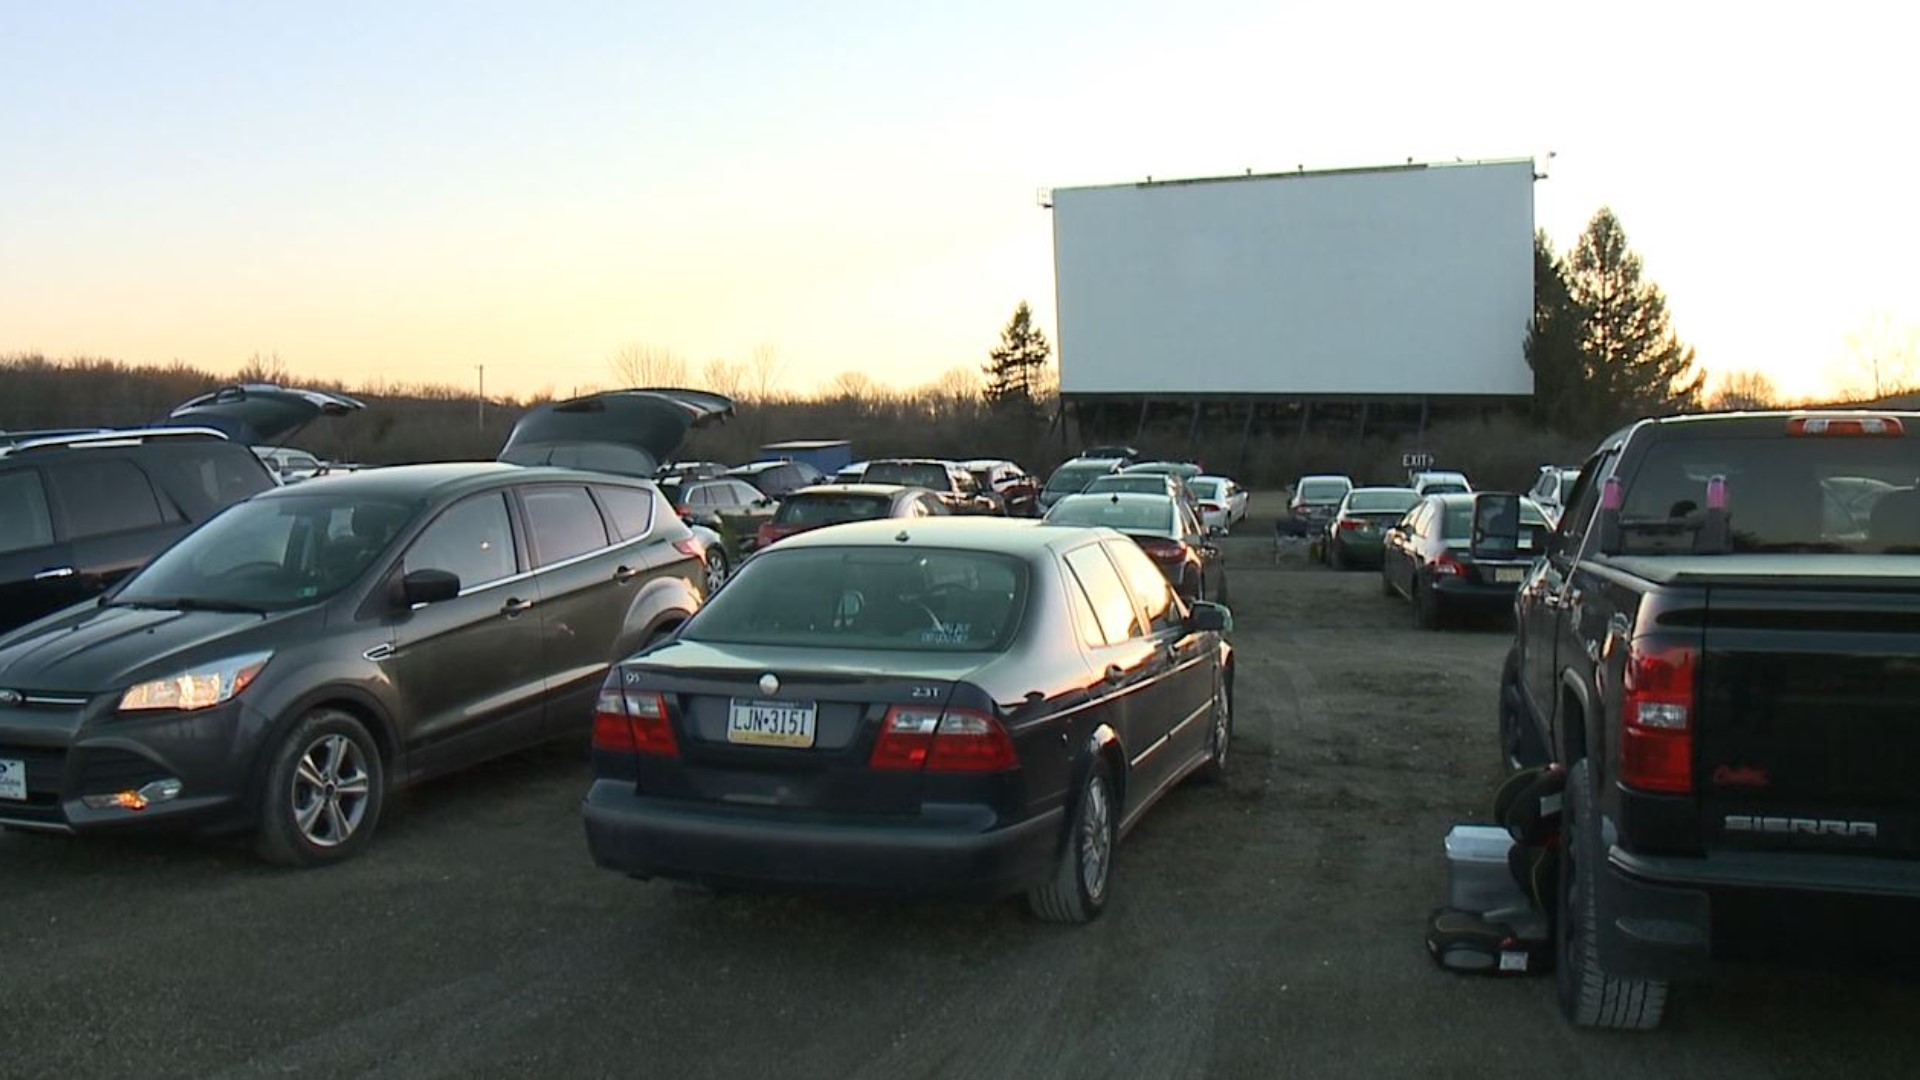 Drive-in theaters saw a big spike in popularity last year, and they expect the same this year, too.